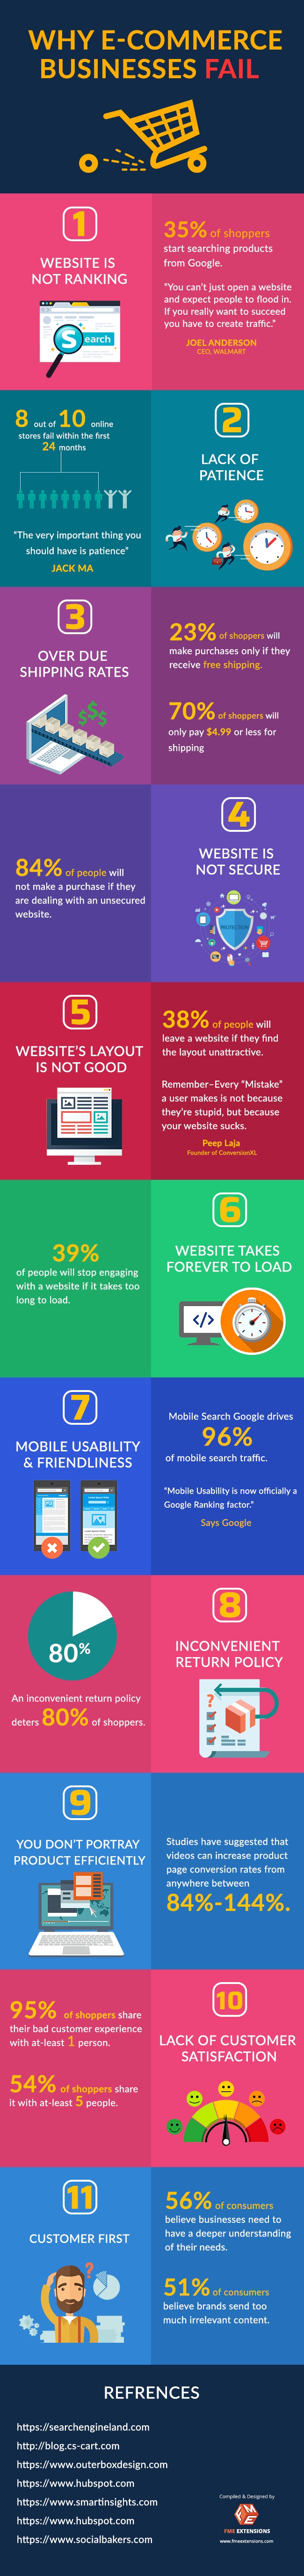 Infographic: 11 Ecommerce Website Mistakes to Avoid